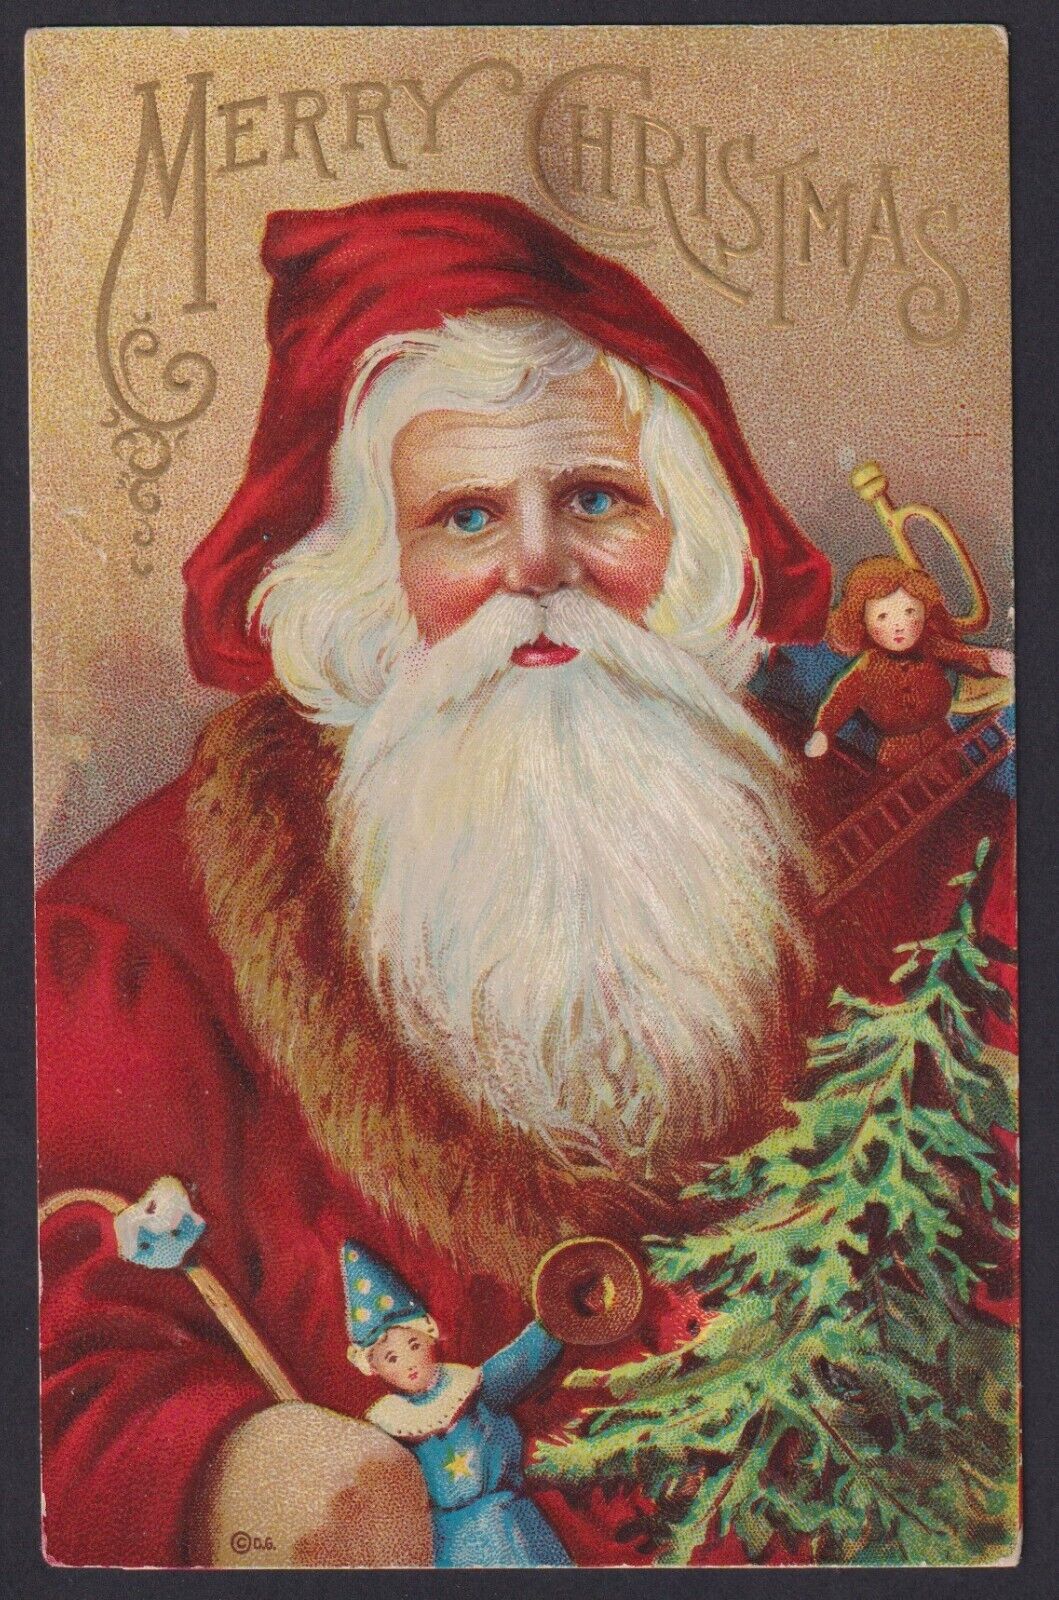 1912 Postcard Old World Santa Red Robe Bag of Toys Rare D Goodie Publisher No 28